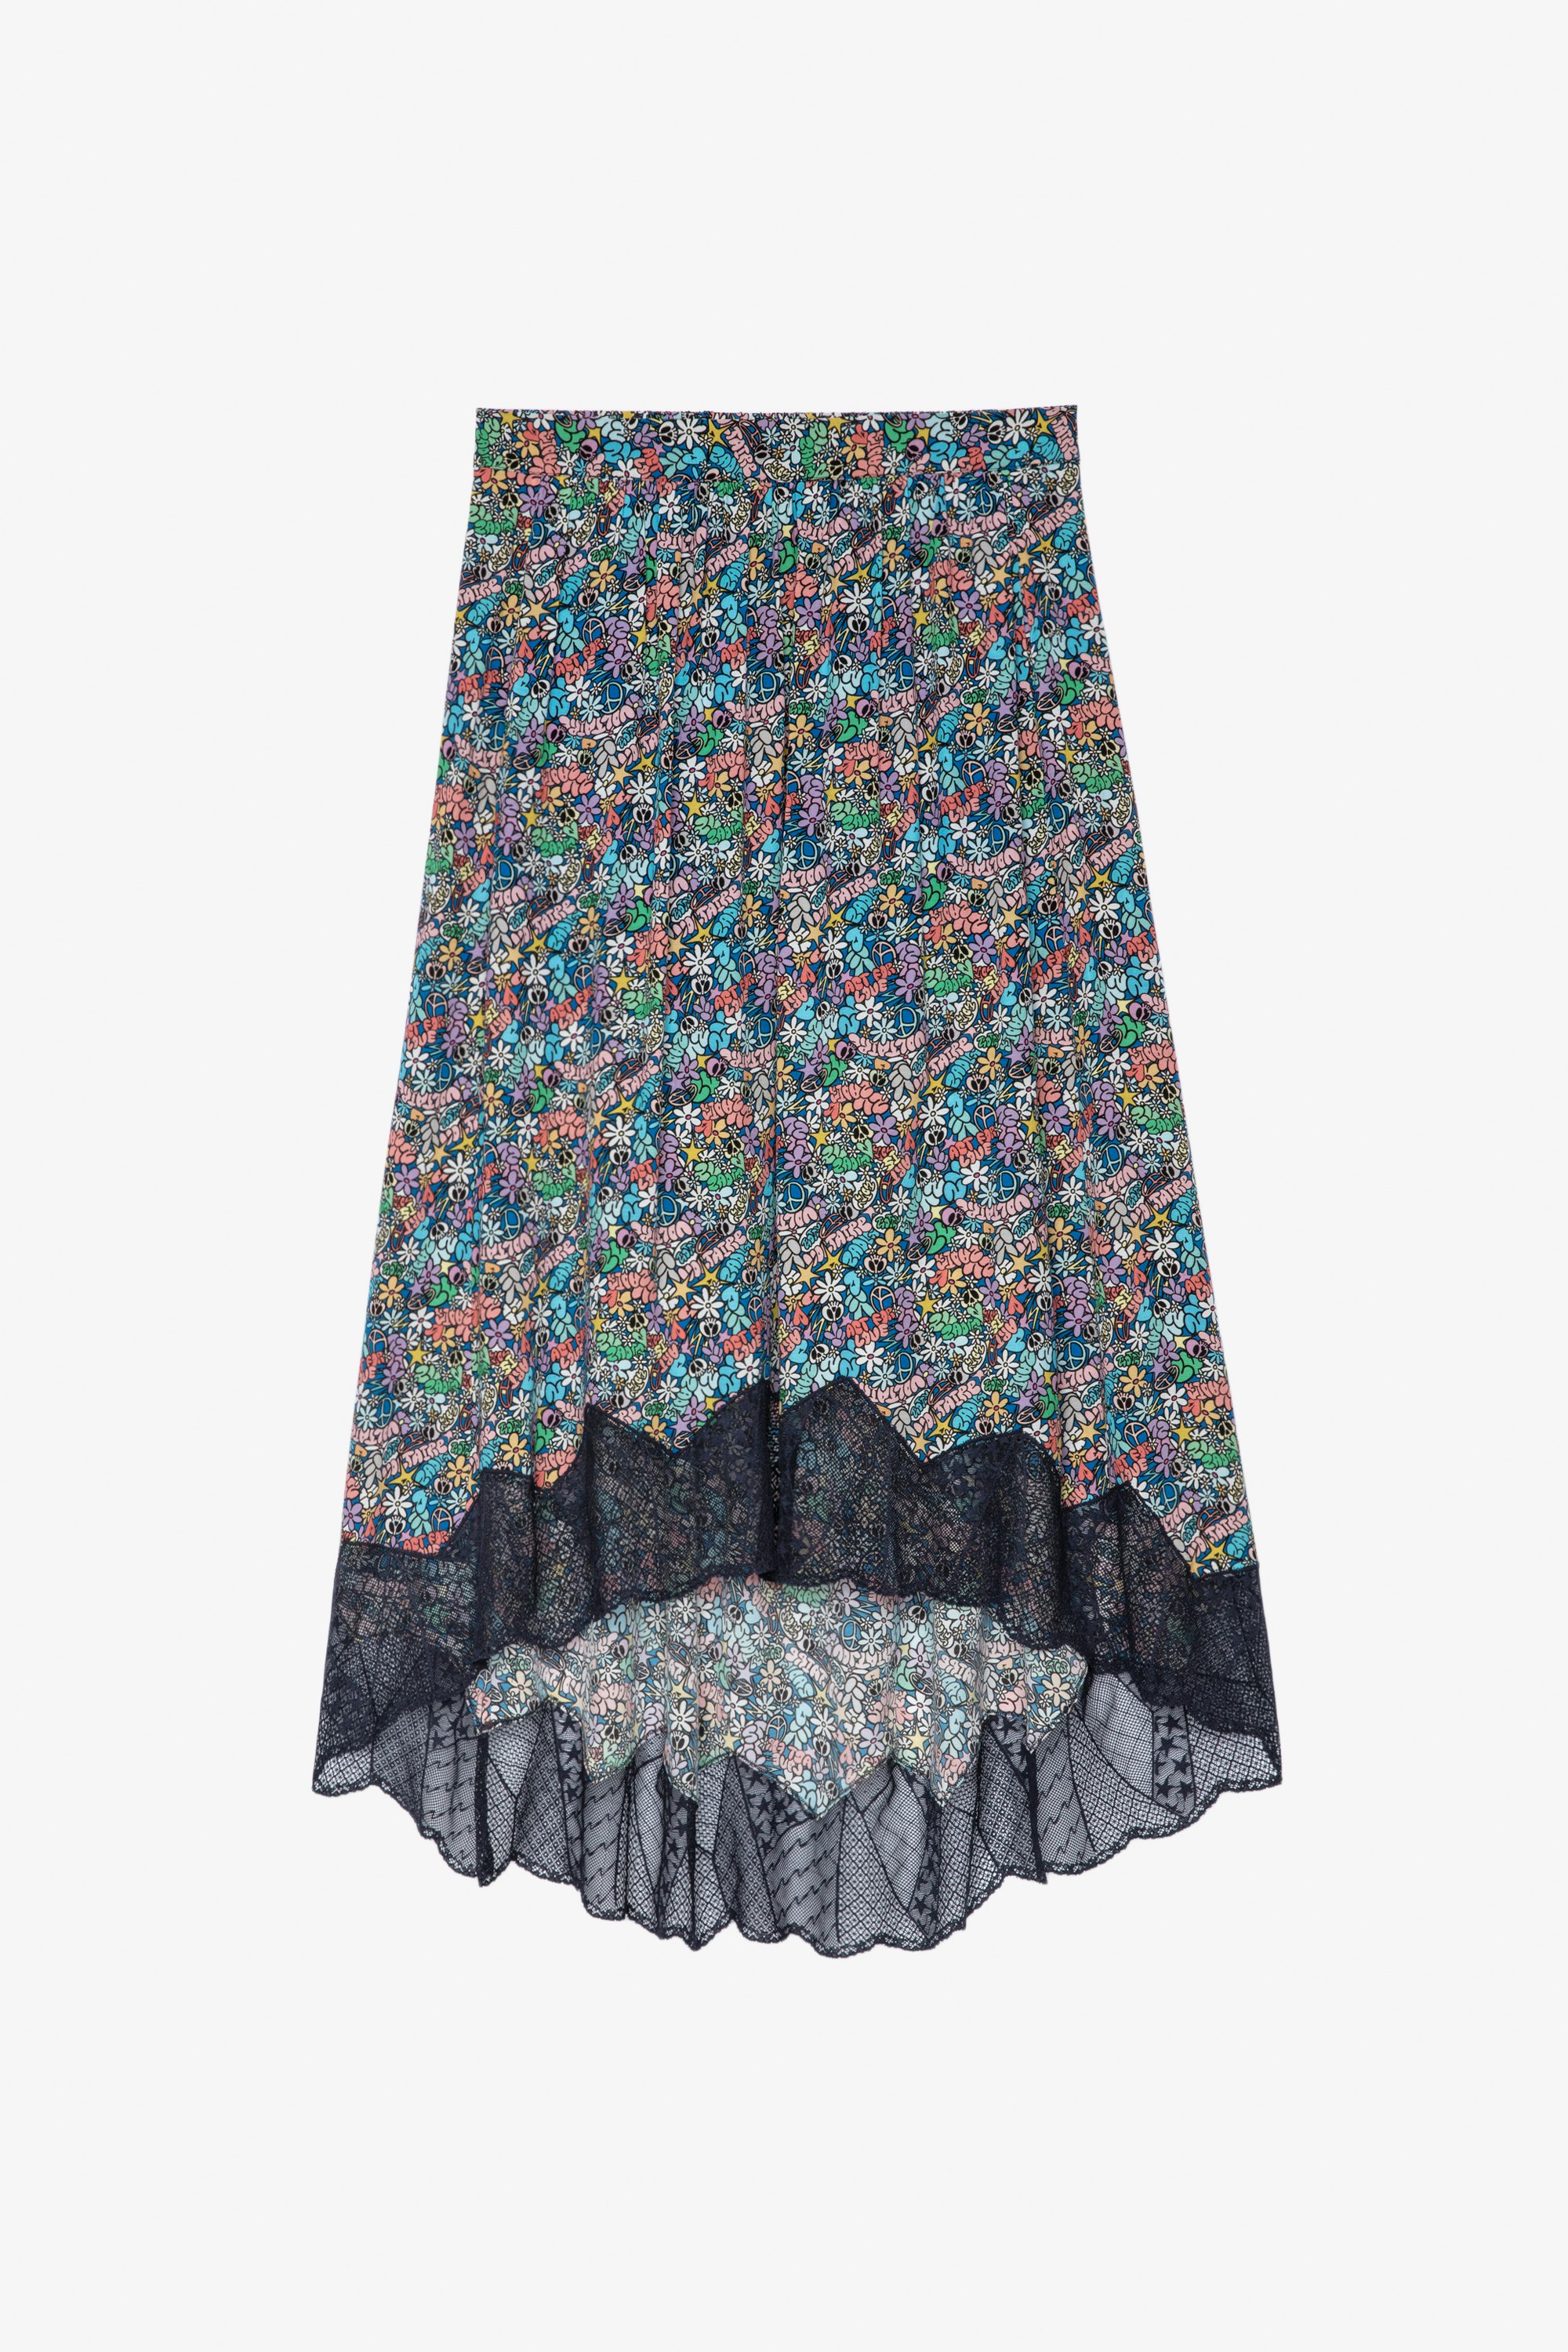 Joslin Skirt Women's mid-length multicoloured asymmetric skirt with liberty floral print and lace